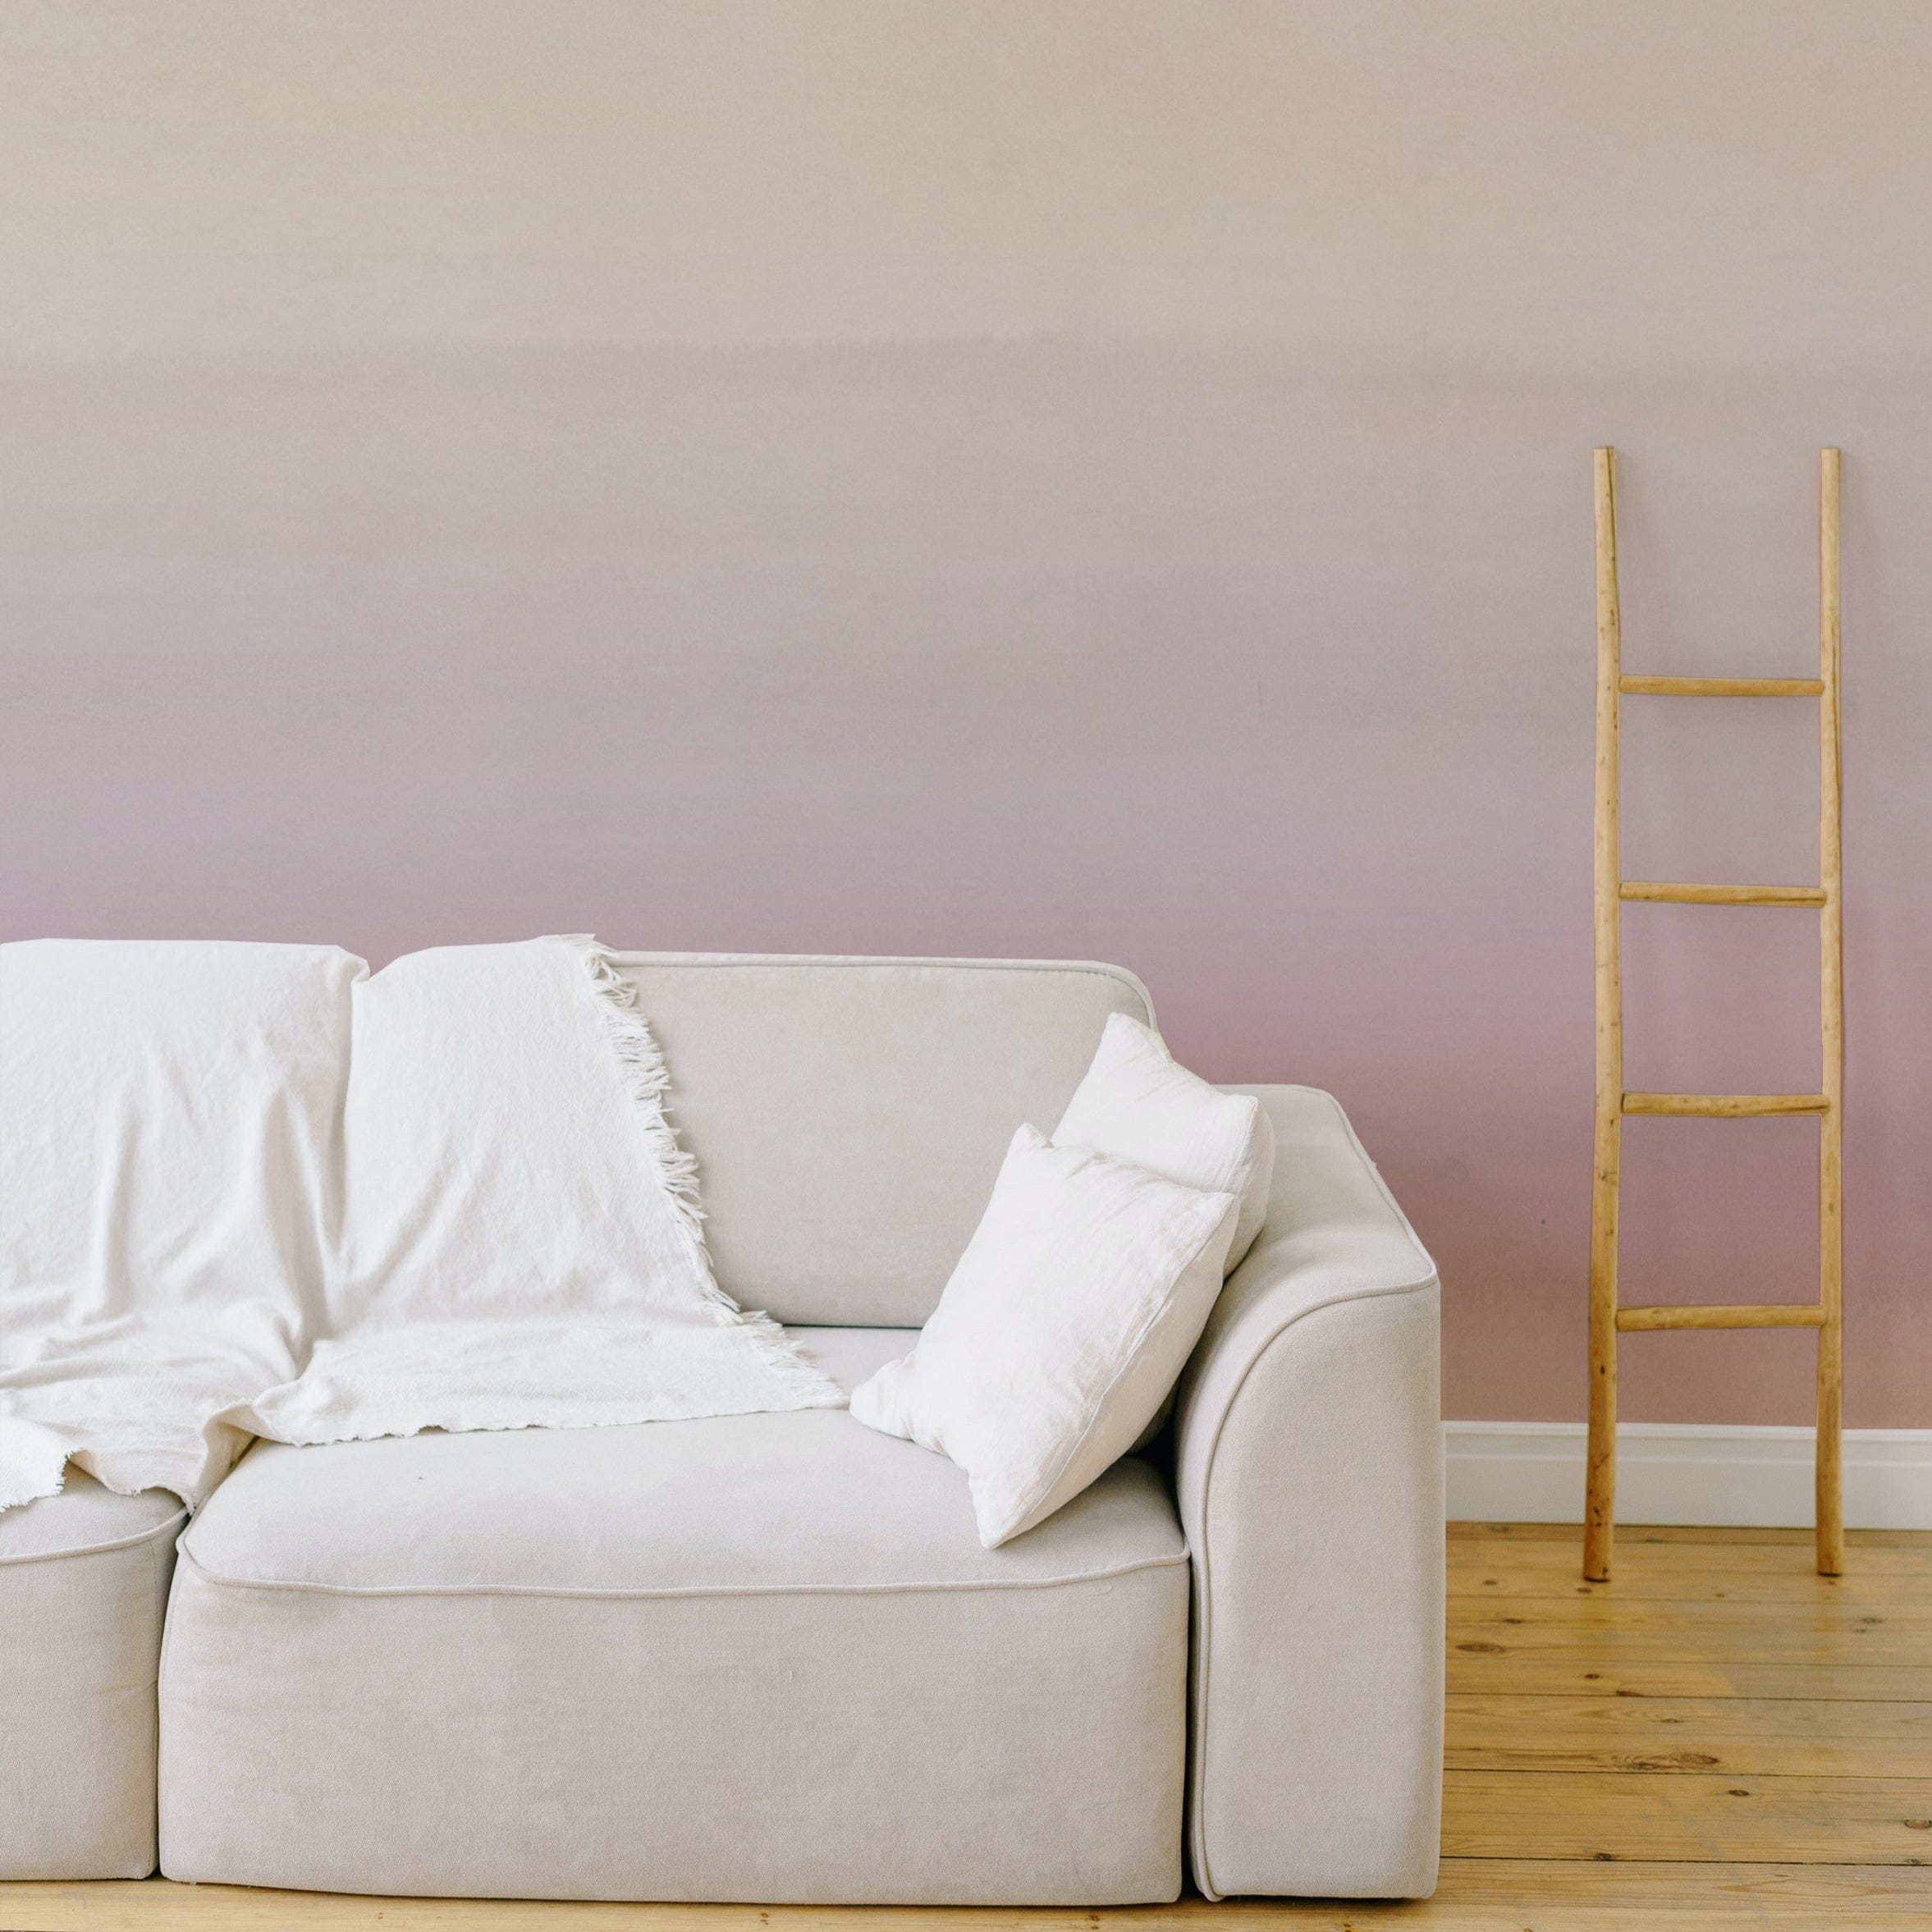 A cozy living room setting with a large, plush sofa against a wall adorned with Blush Gradient Wallpaper that fades from a creamy color to a gentle blush tone. A wooden ladder leans against the wall as a decorative element.